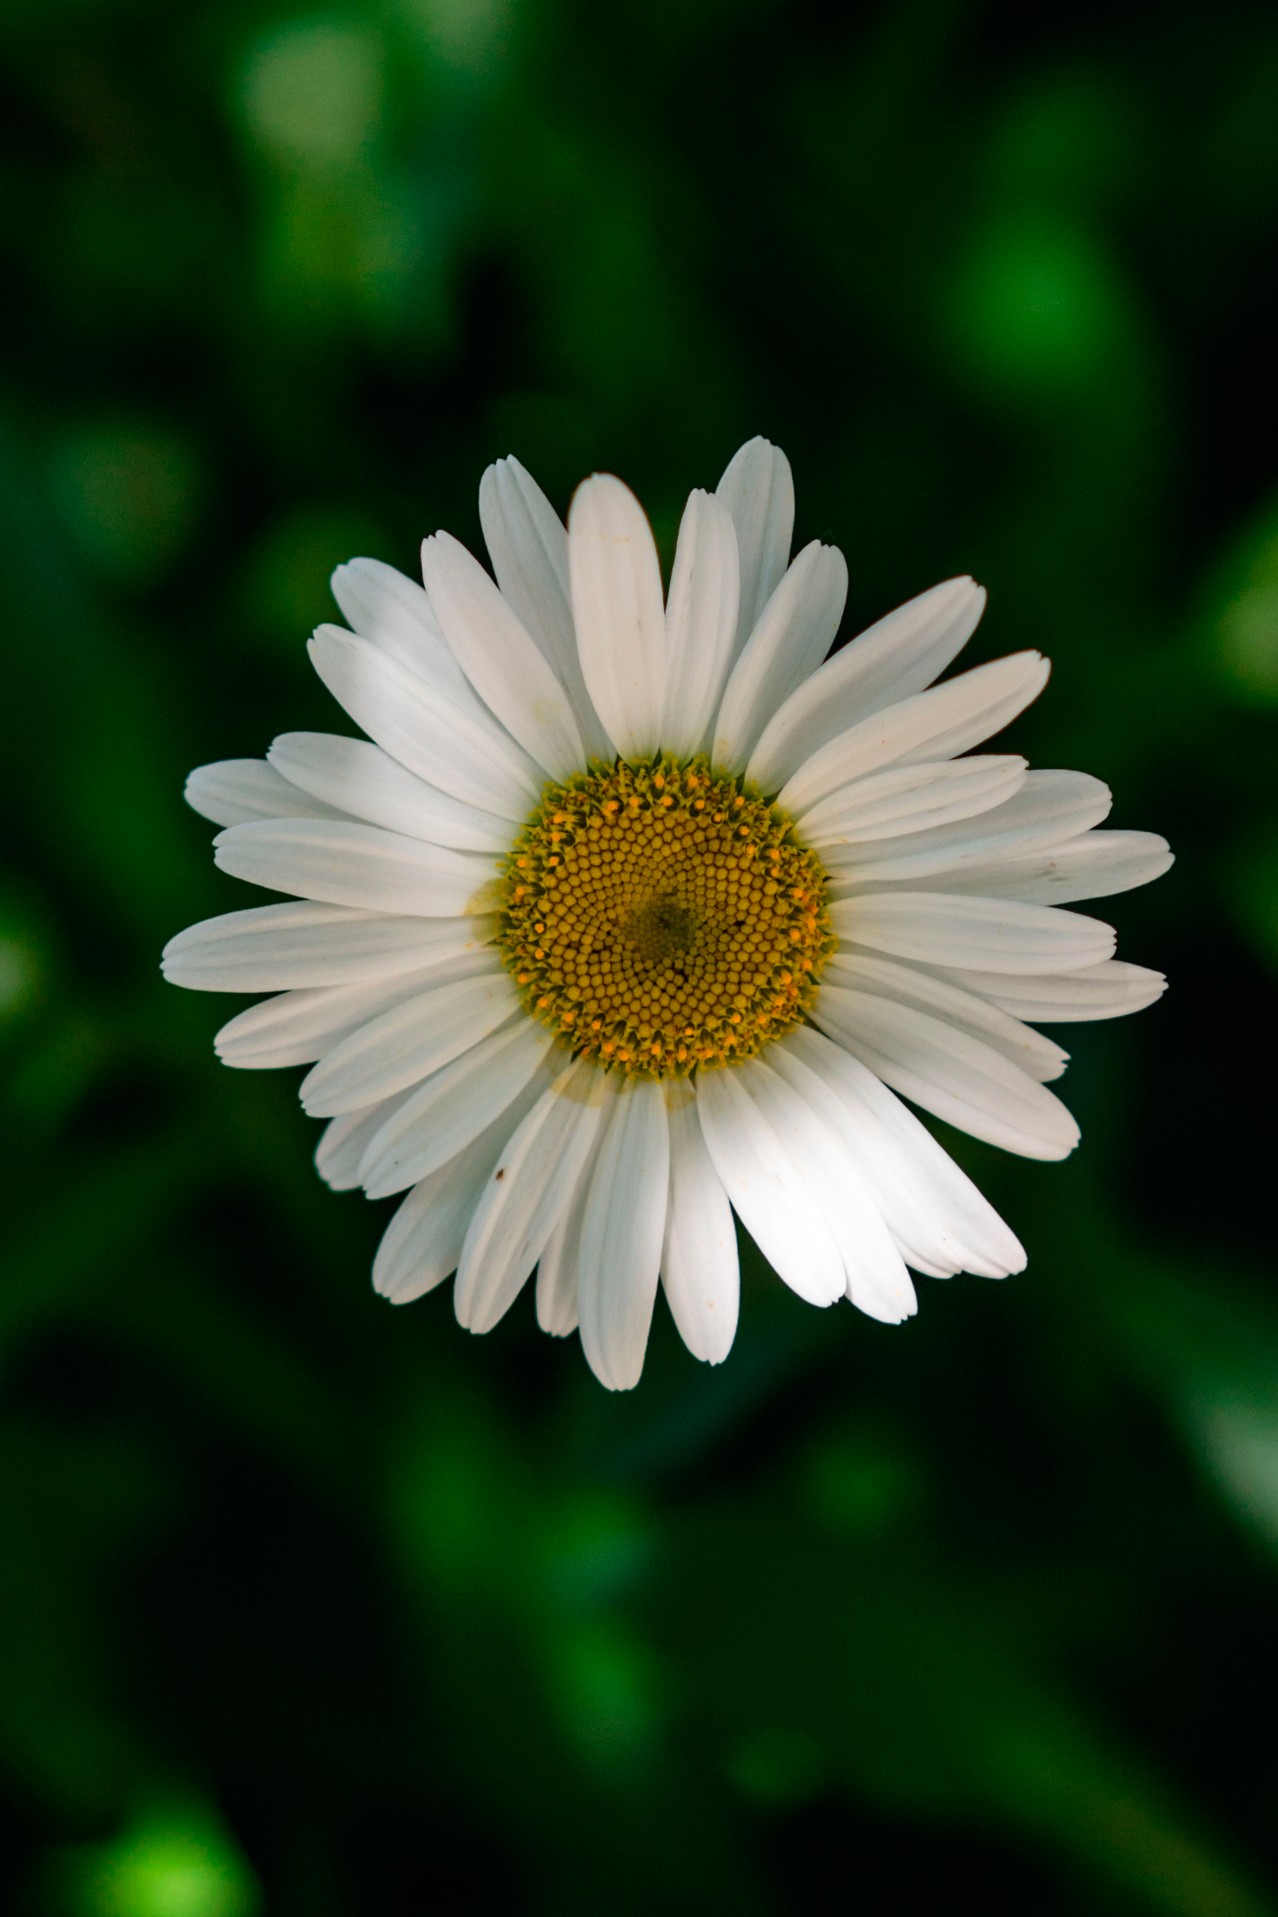 Chamomile on the blurred green background